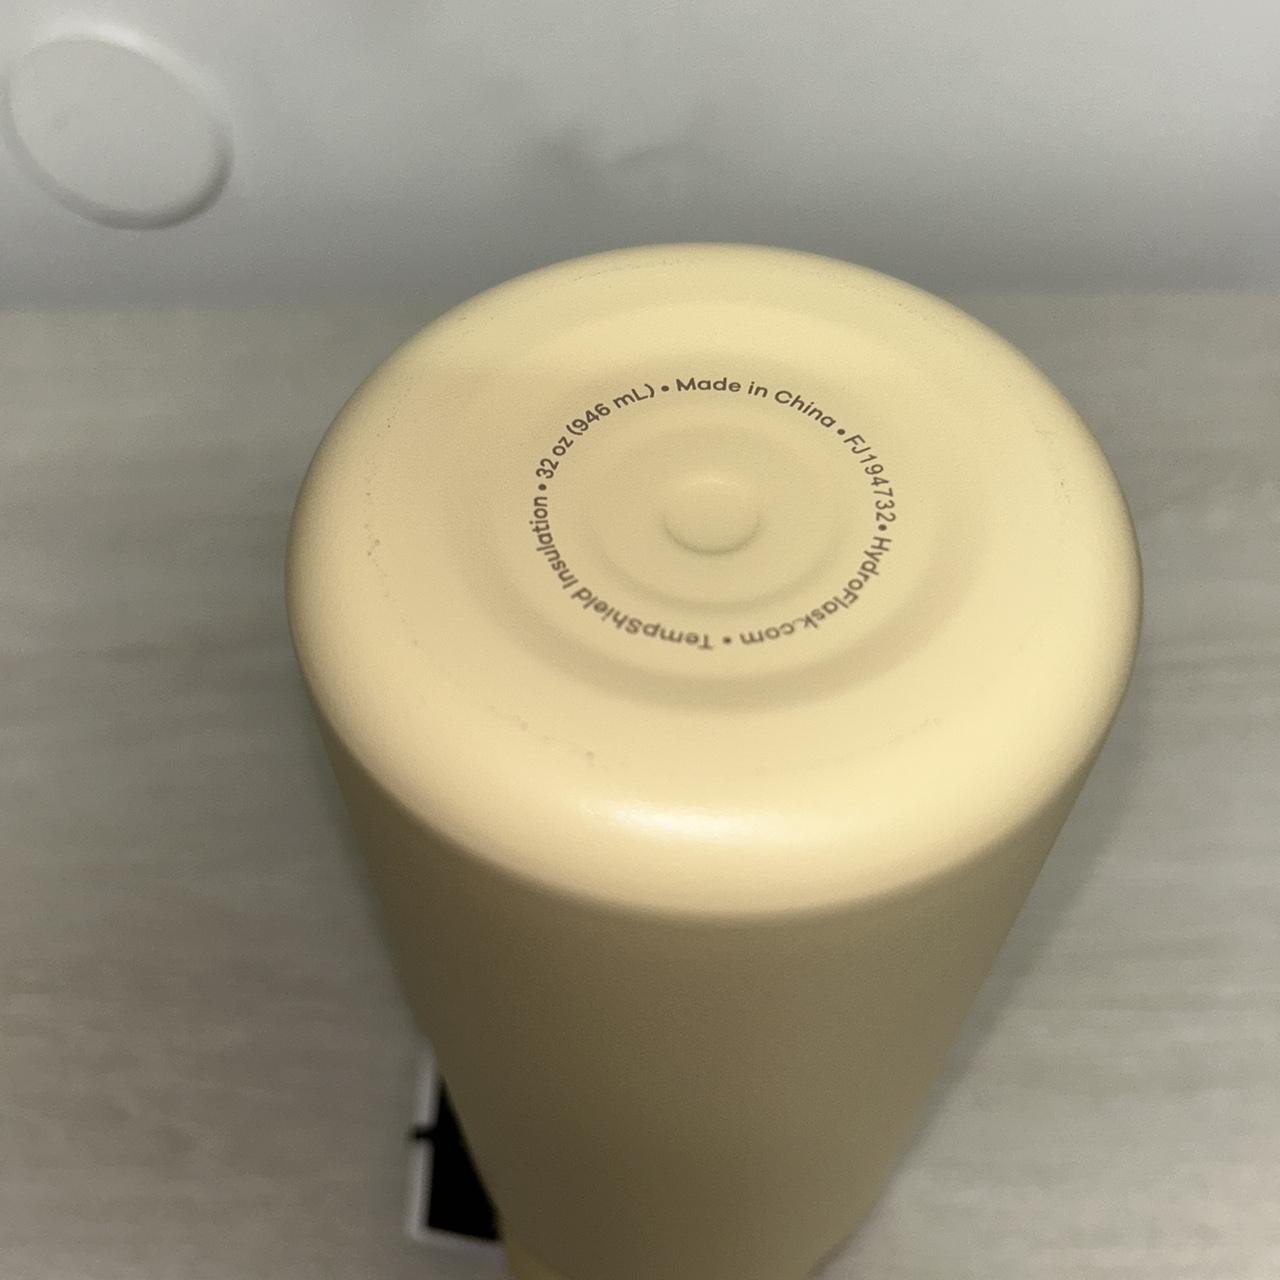 whole foods taproot limited edition hydroflask, - Depop